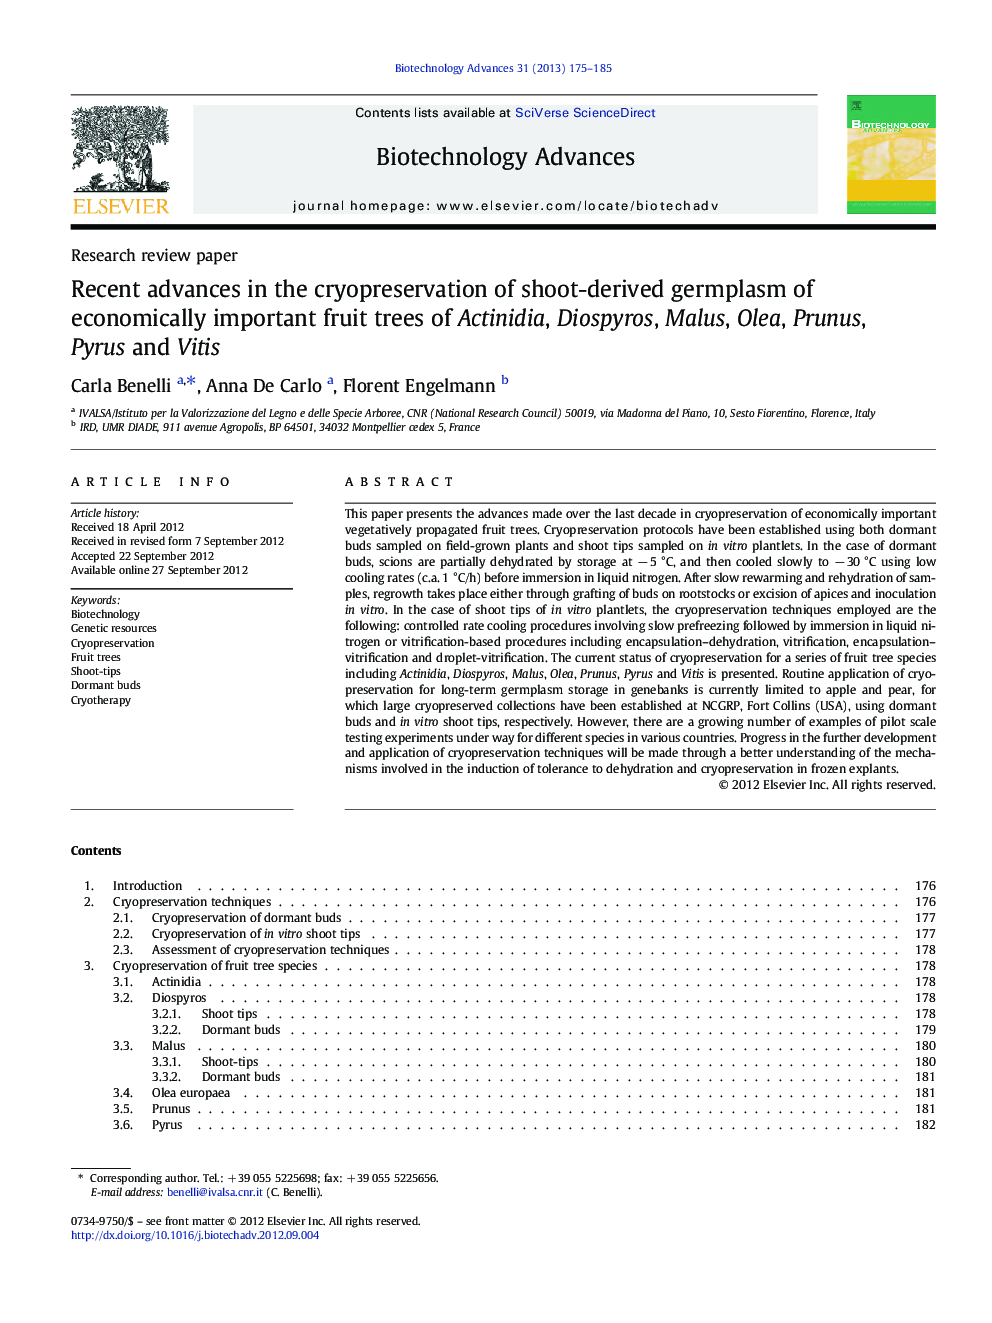 Recent advances in the cryopreservation of shoot-derived germplasm of economically important fruit trees of Actinidia, Diospyros, Malus, Olea, Prunus, Pyrus and Vitis